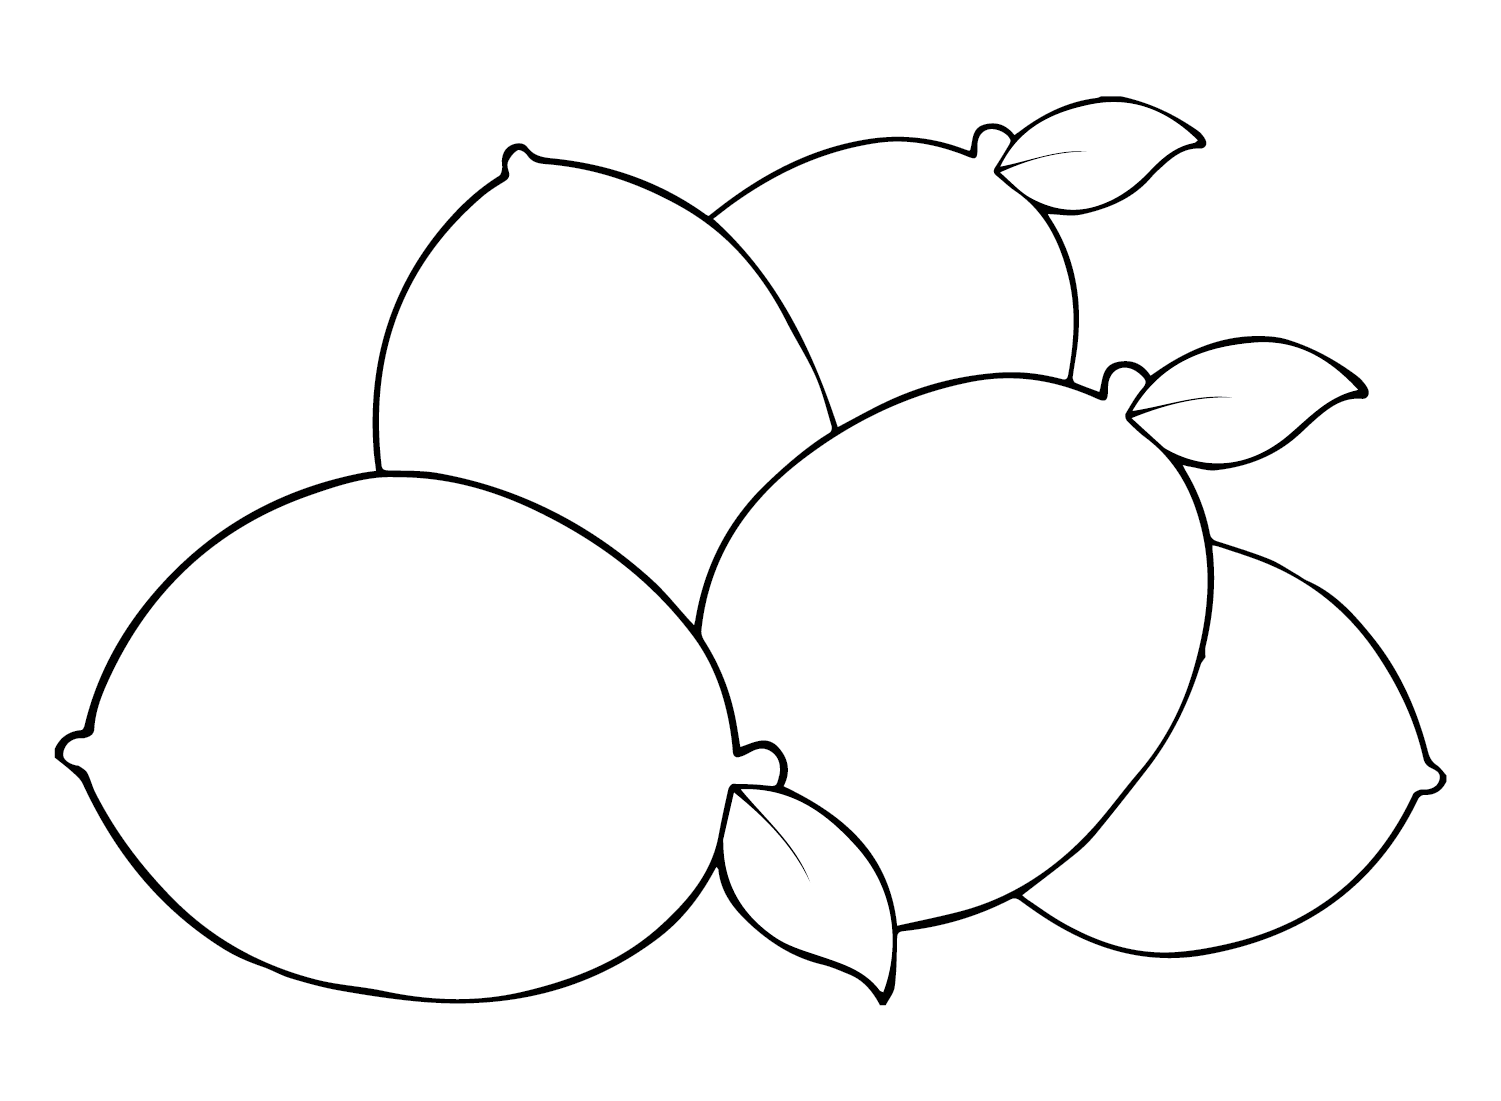 Lemons Images Coloring Page